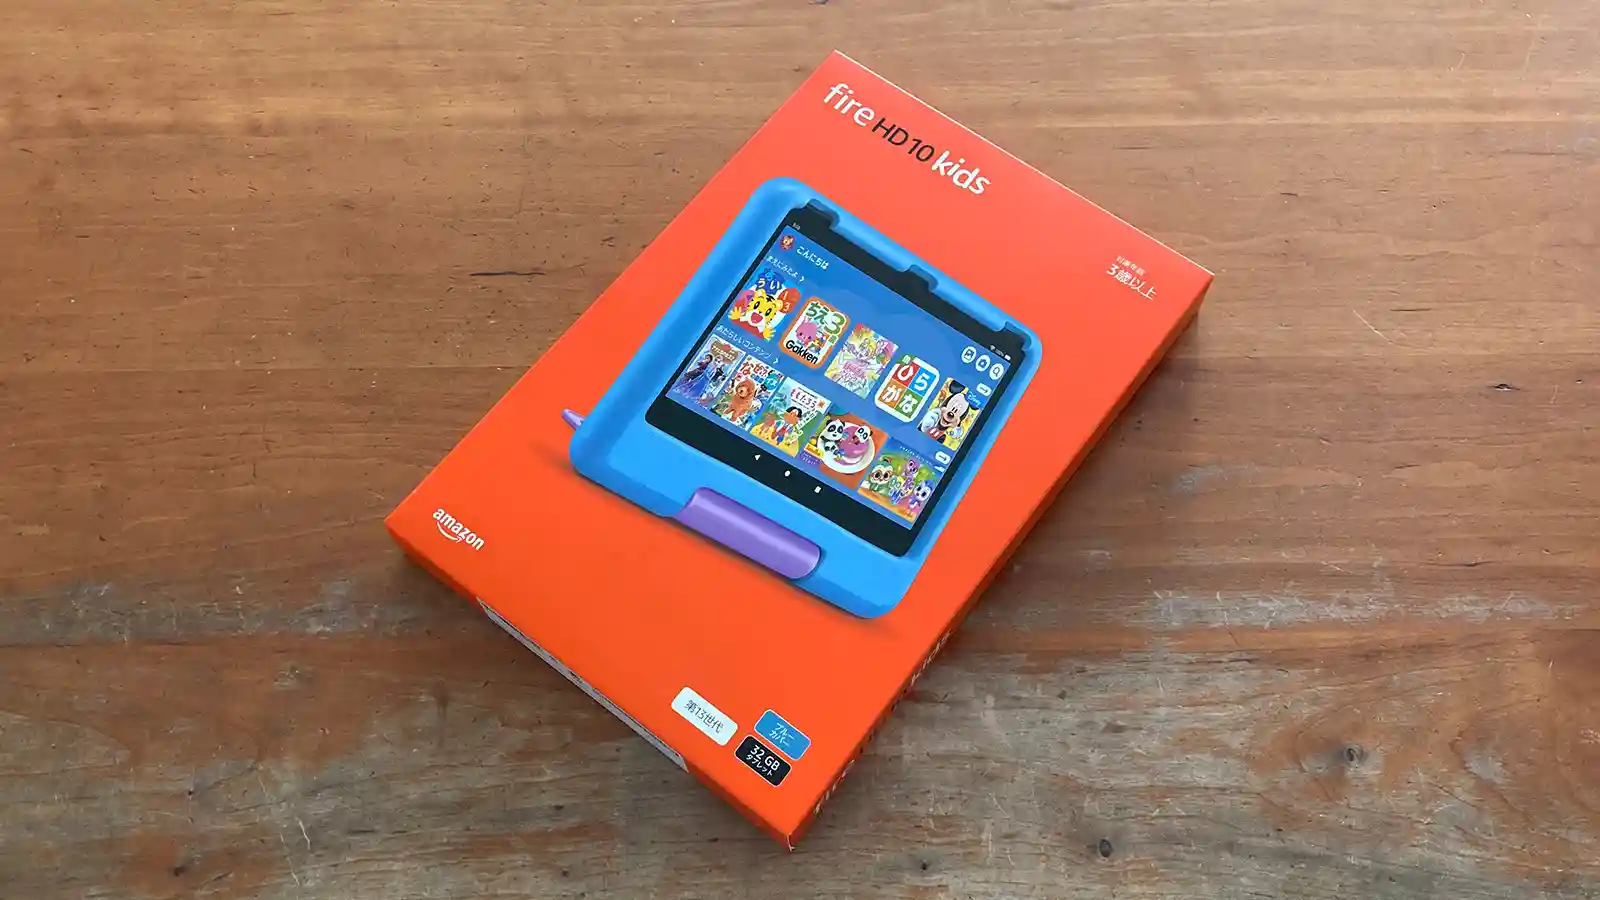 Amazon Fireタブレット キッズモデル Fire 7 Fire HD 8 Fire HD 10